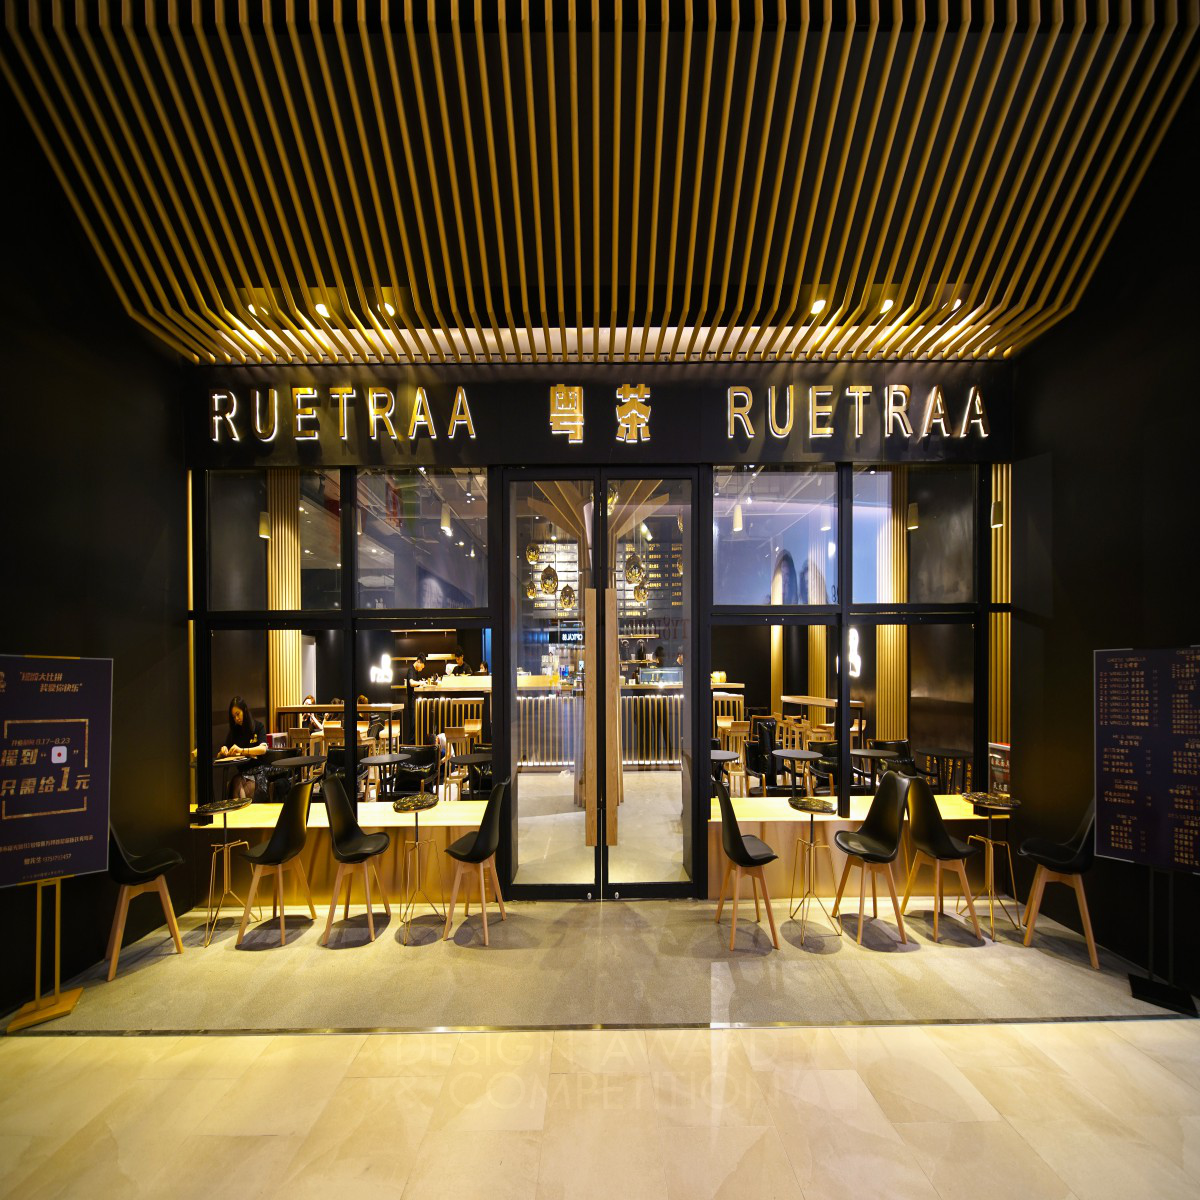 Ruetraa A space for enjoying the music and drink by ZhiTao 唐